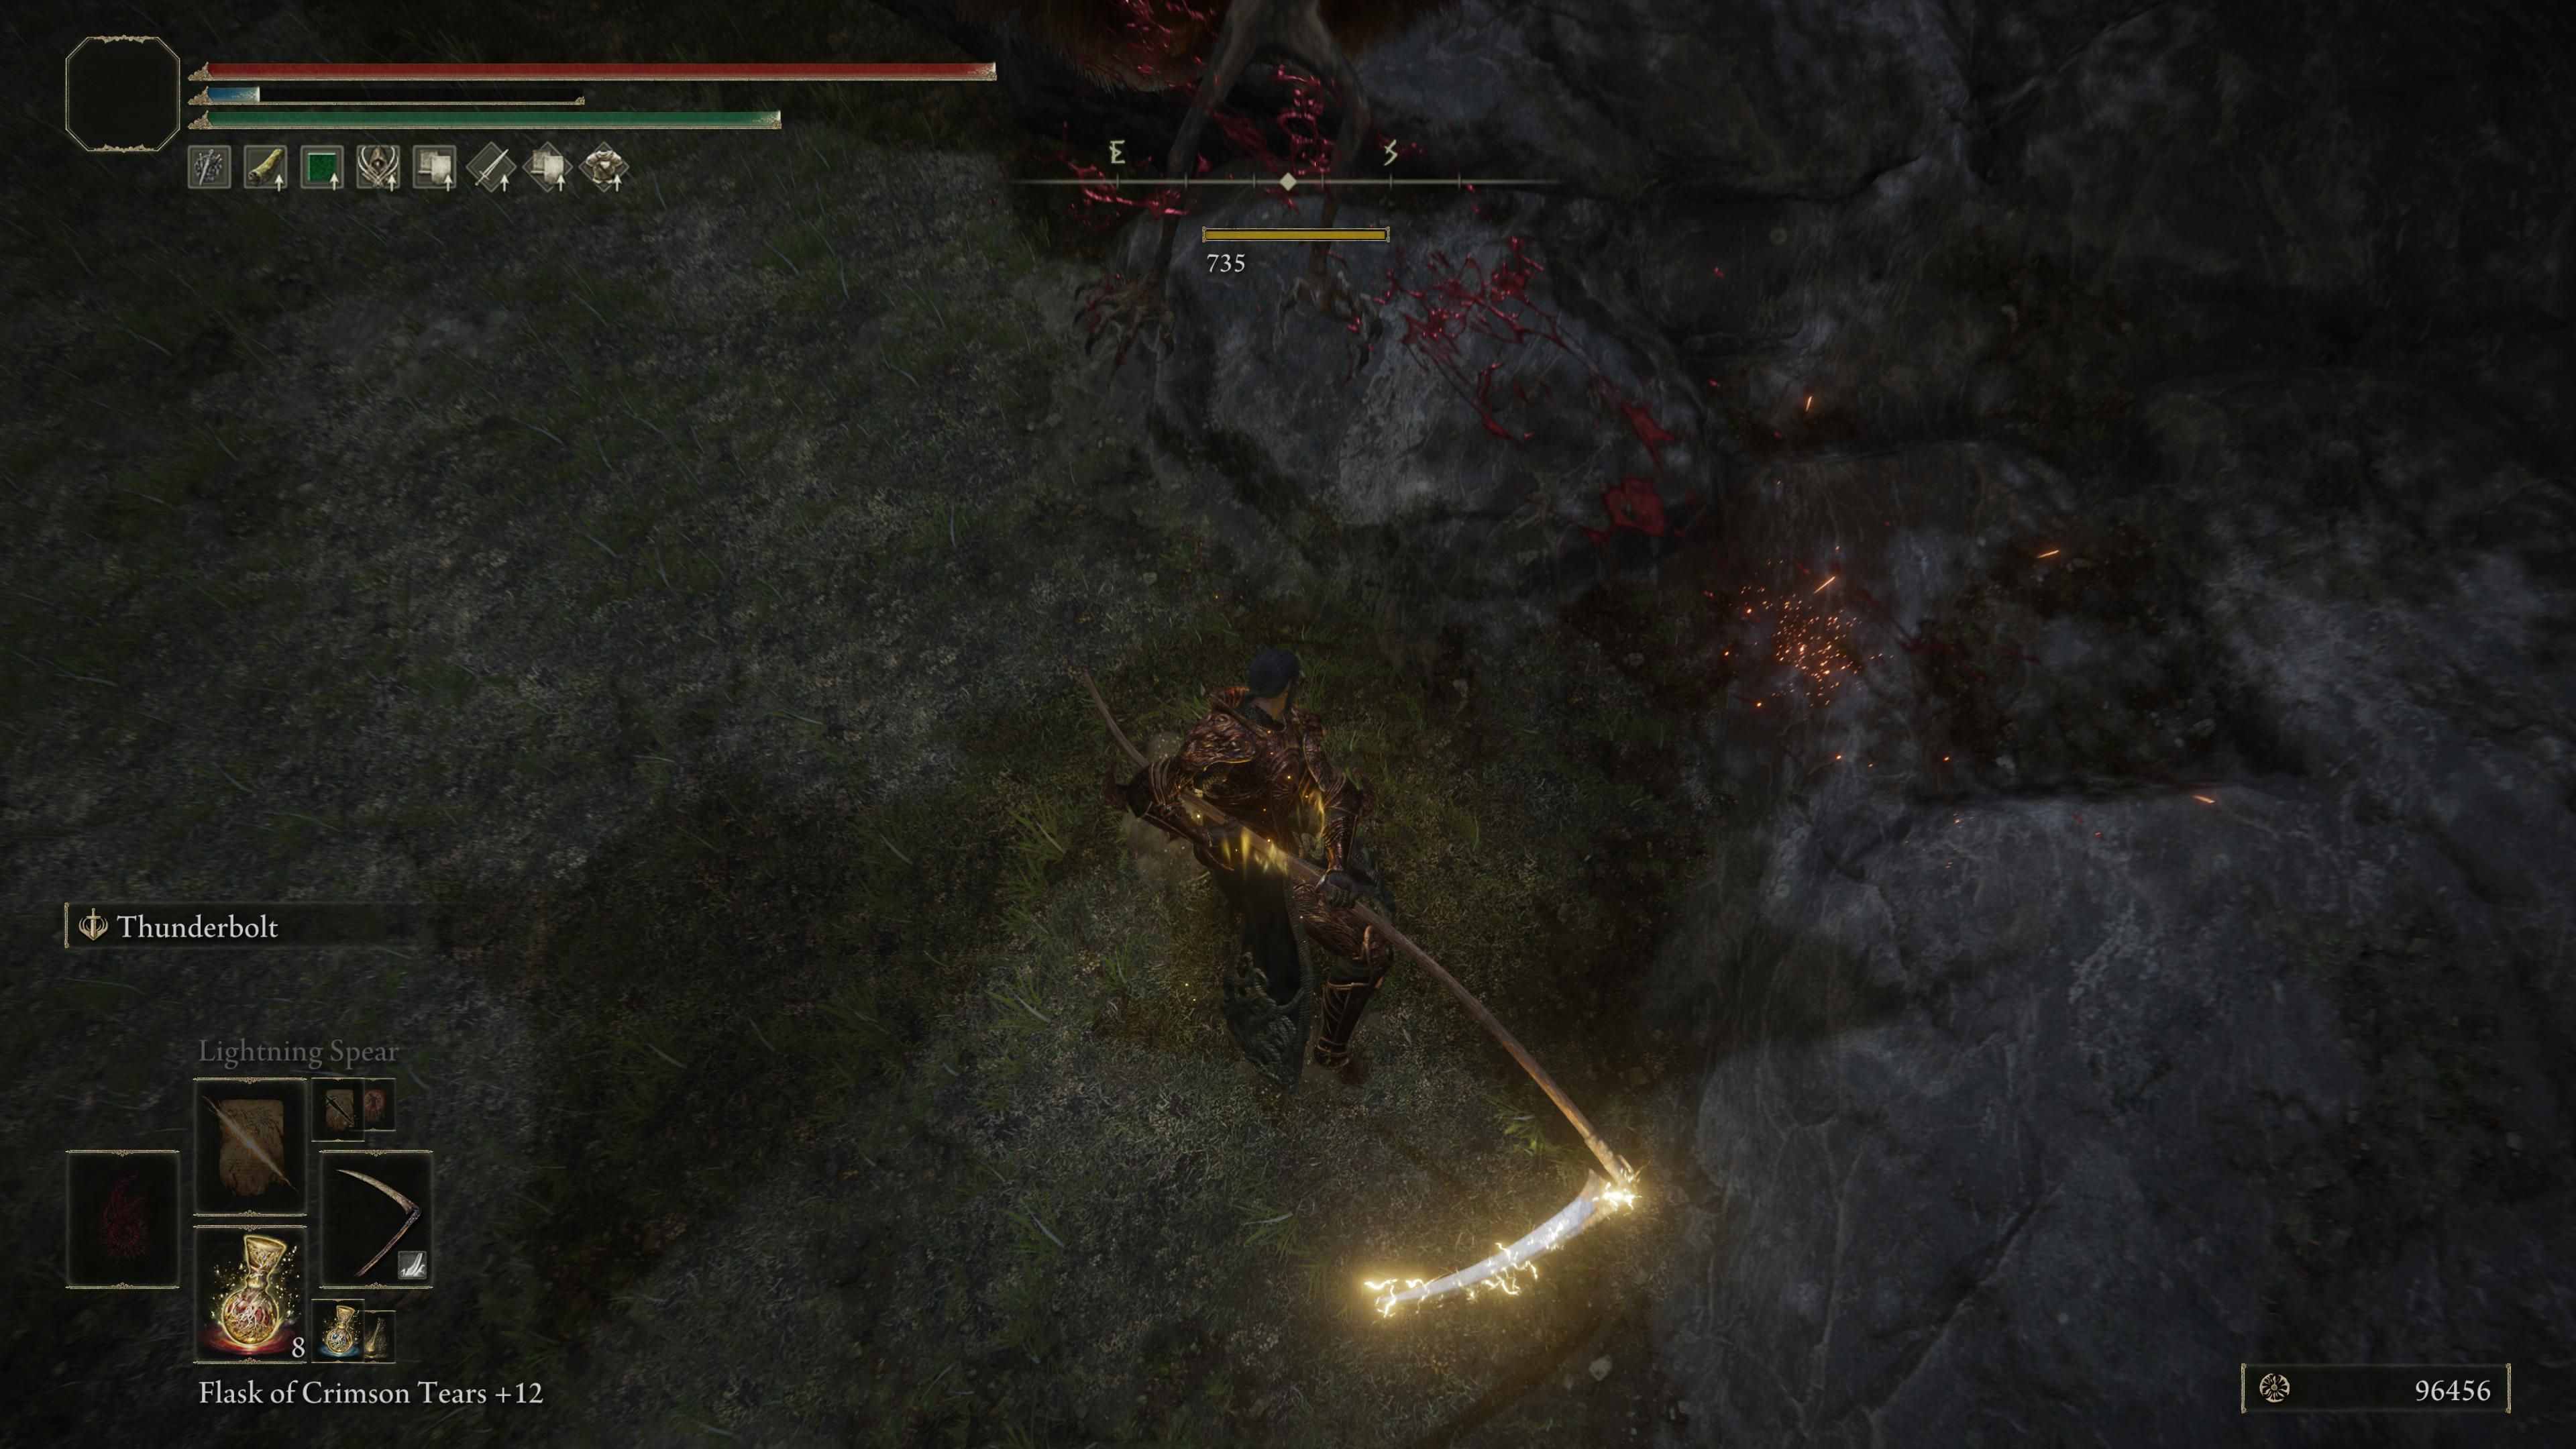 A Tarnished attacks using a Scythe in Elden Ring.